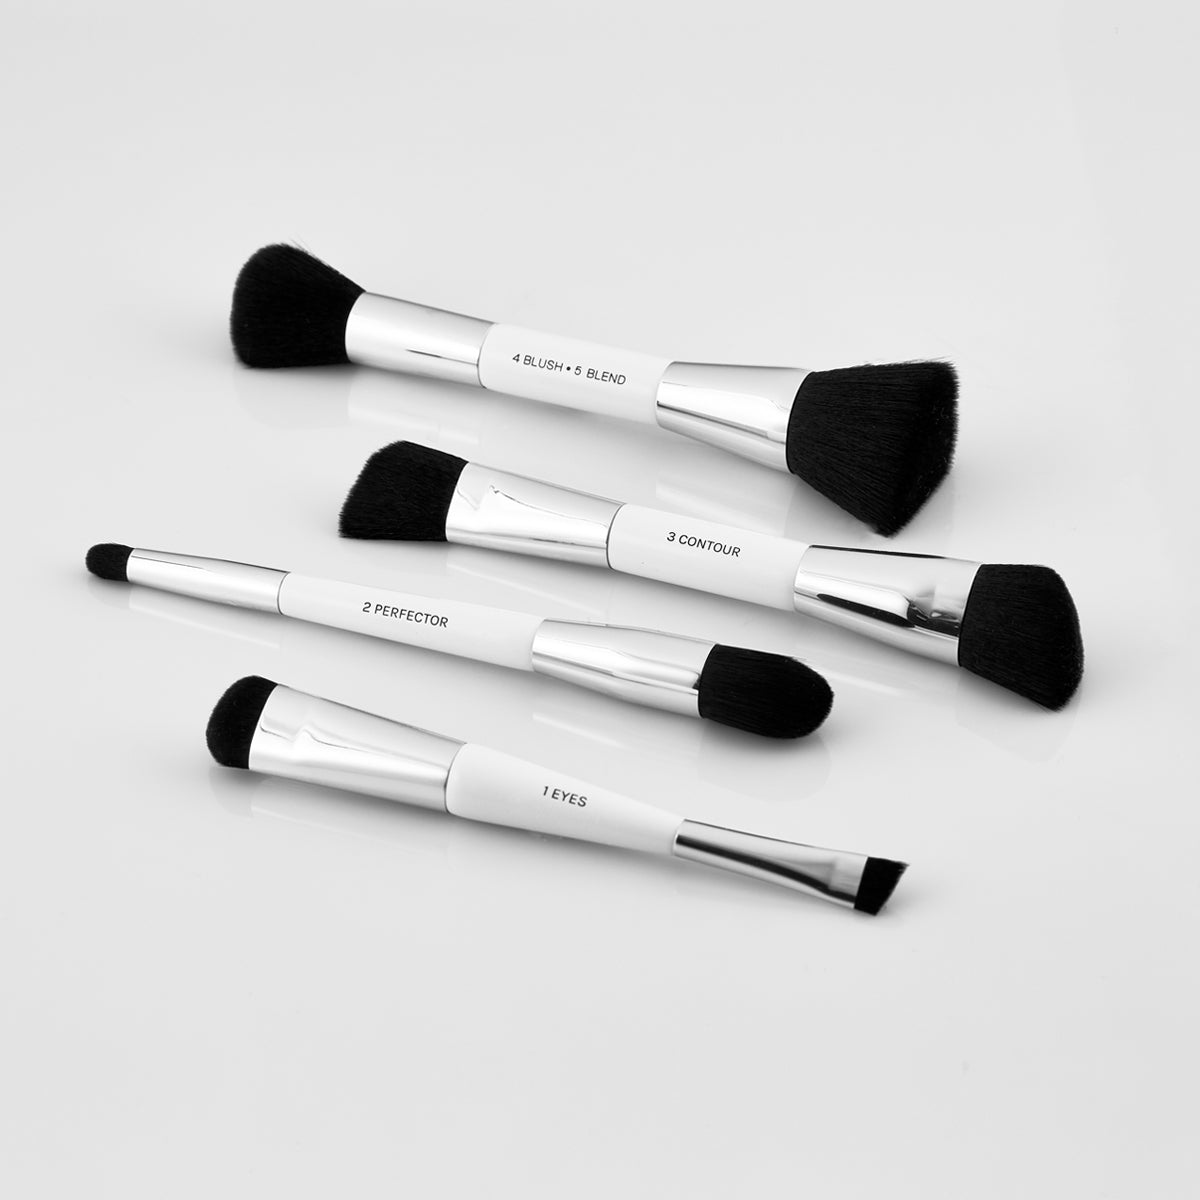 4 Dual ended Essential Brushes. 1 eyes, 2 perfector brush, 3 contour, 4 blush, 5 blend